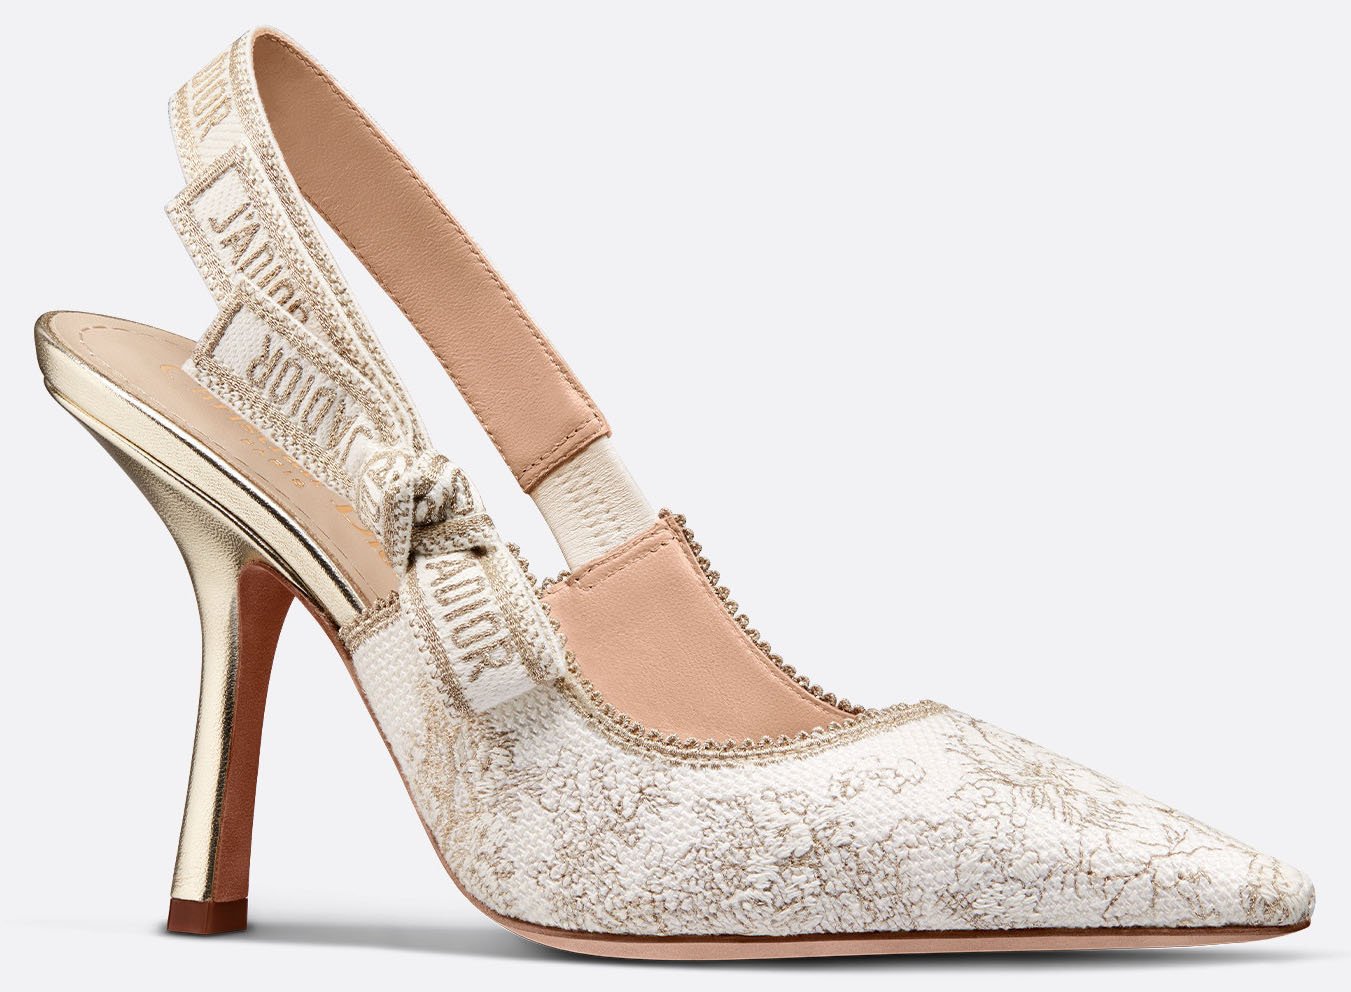 Refined and elegant, this luminous J'Adior pump is crafted in cotton with metallic embroidery and features a cotton ribbon slingback strap